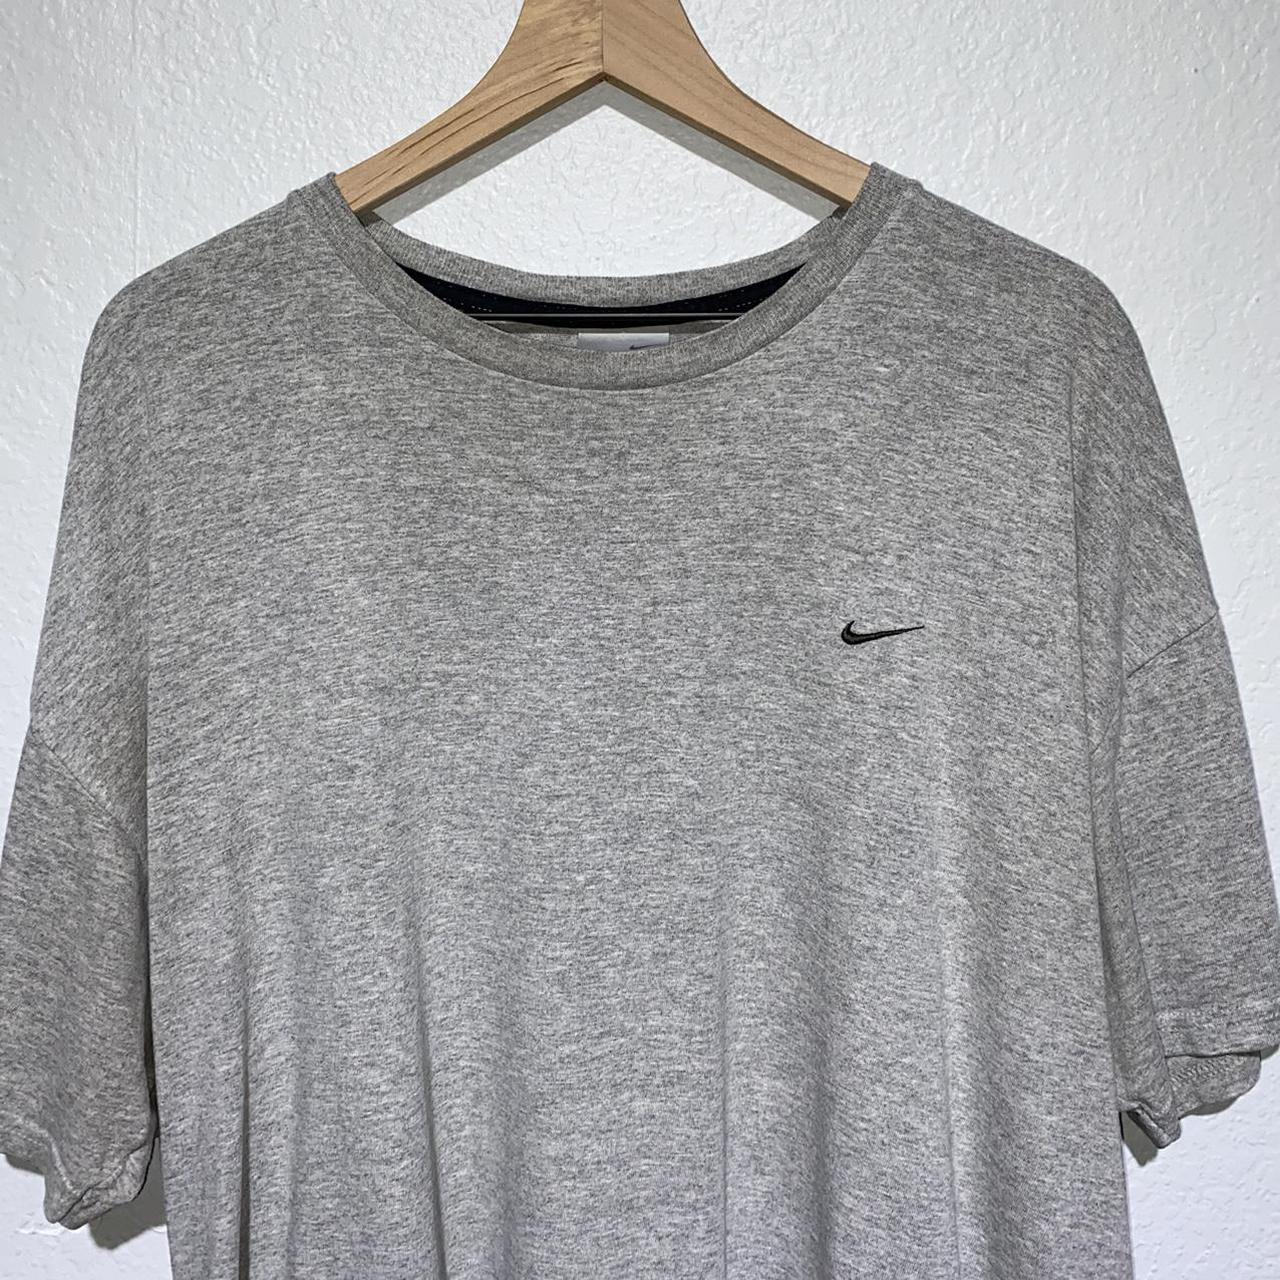 Product Image 2 - Vintage Early 2000s Nike Swoosh